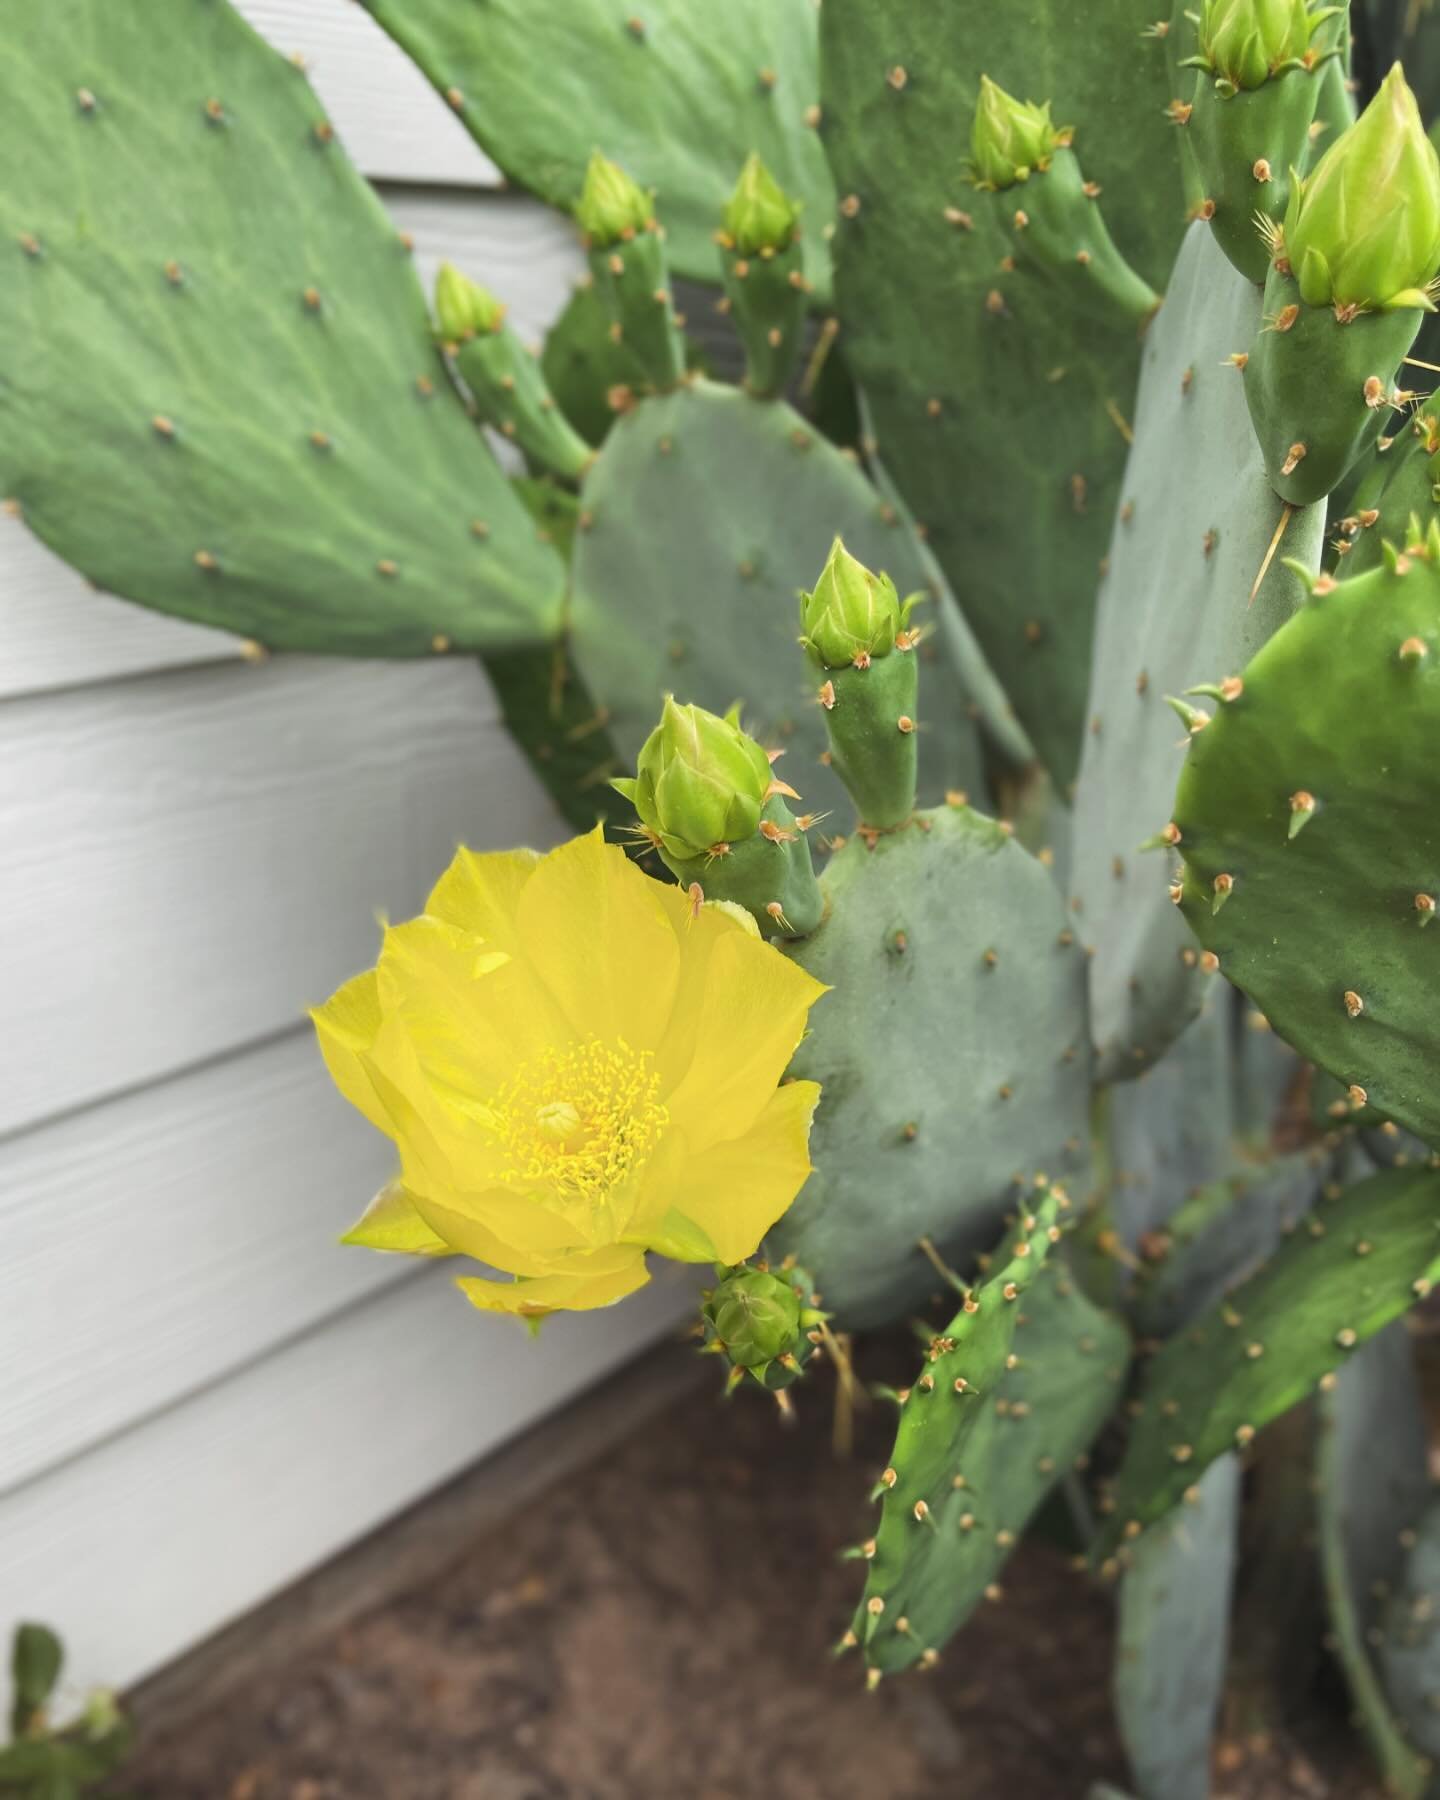 It only happens for a brief time every spring. But, it&rsquo;s worth the wait. 

#cactusbloom #cactus🌵 #cactusblossom #gardengram #rurallife #littlemoments #slowliving